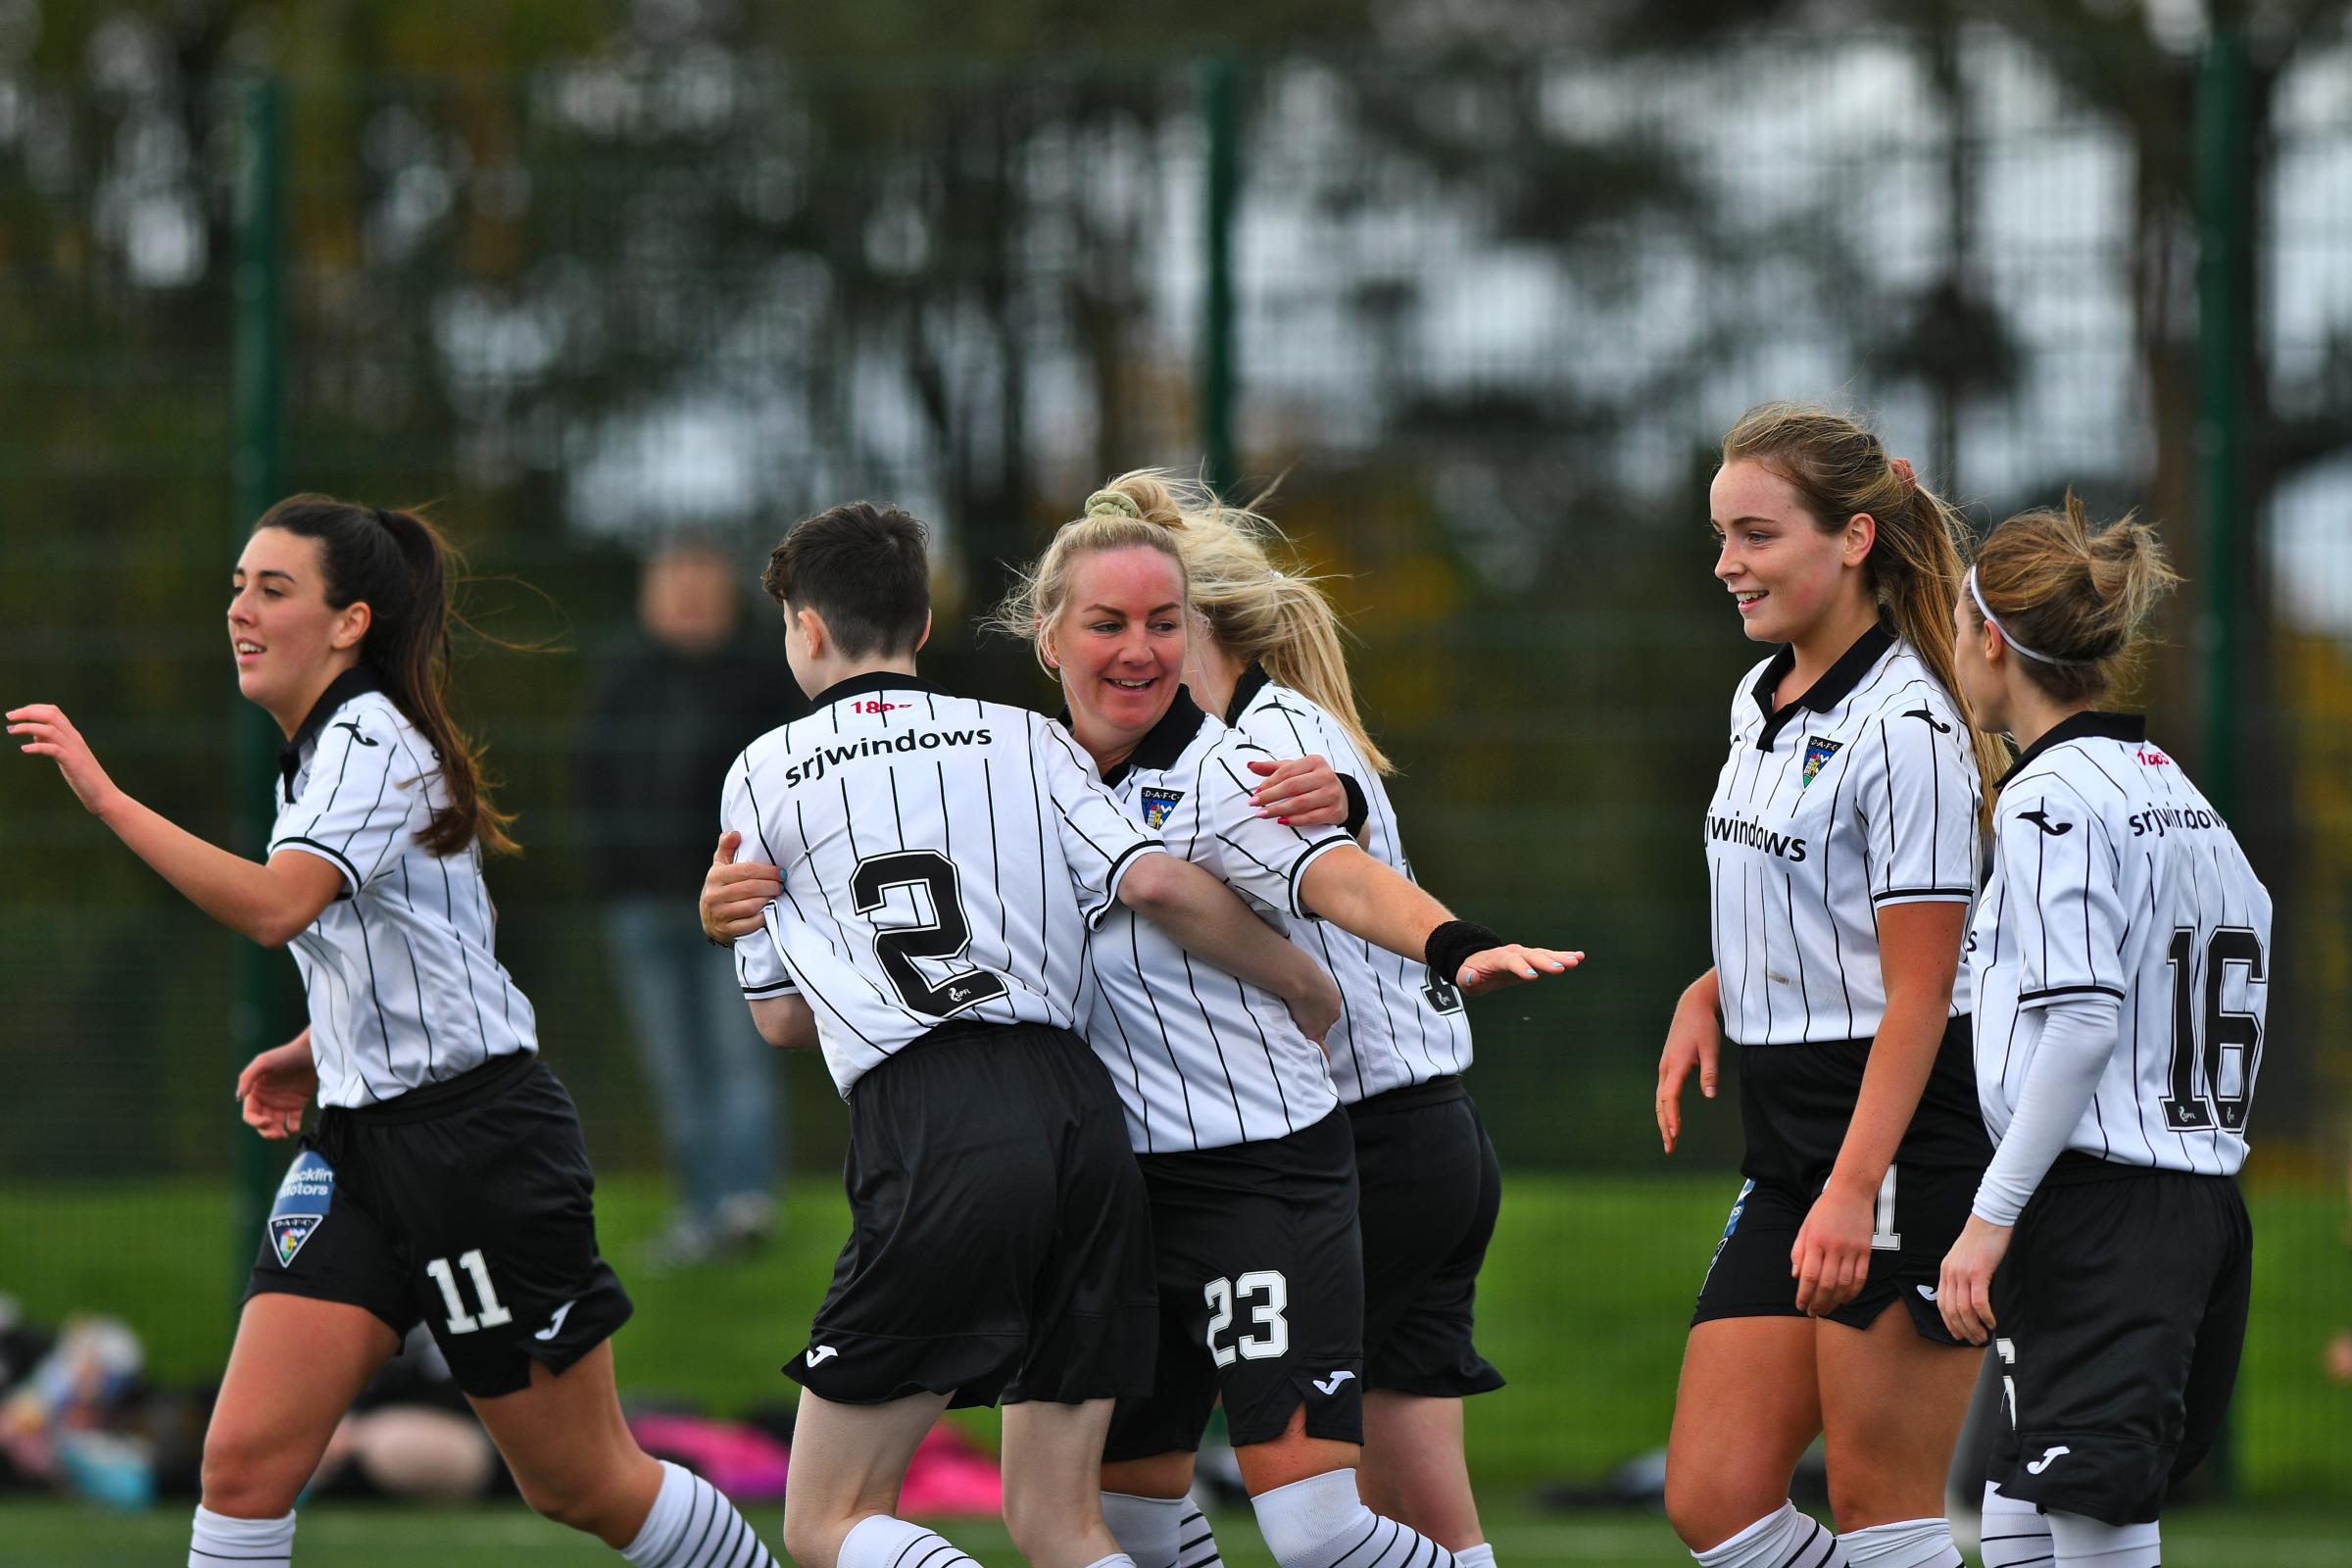 Dunfermline Athletic Ladies to play Bonnyrigg Rose in Scottish Cup